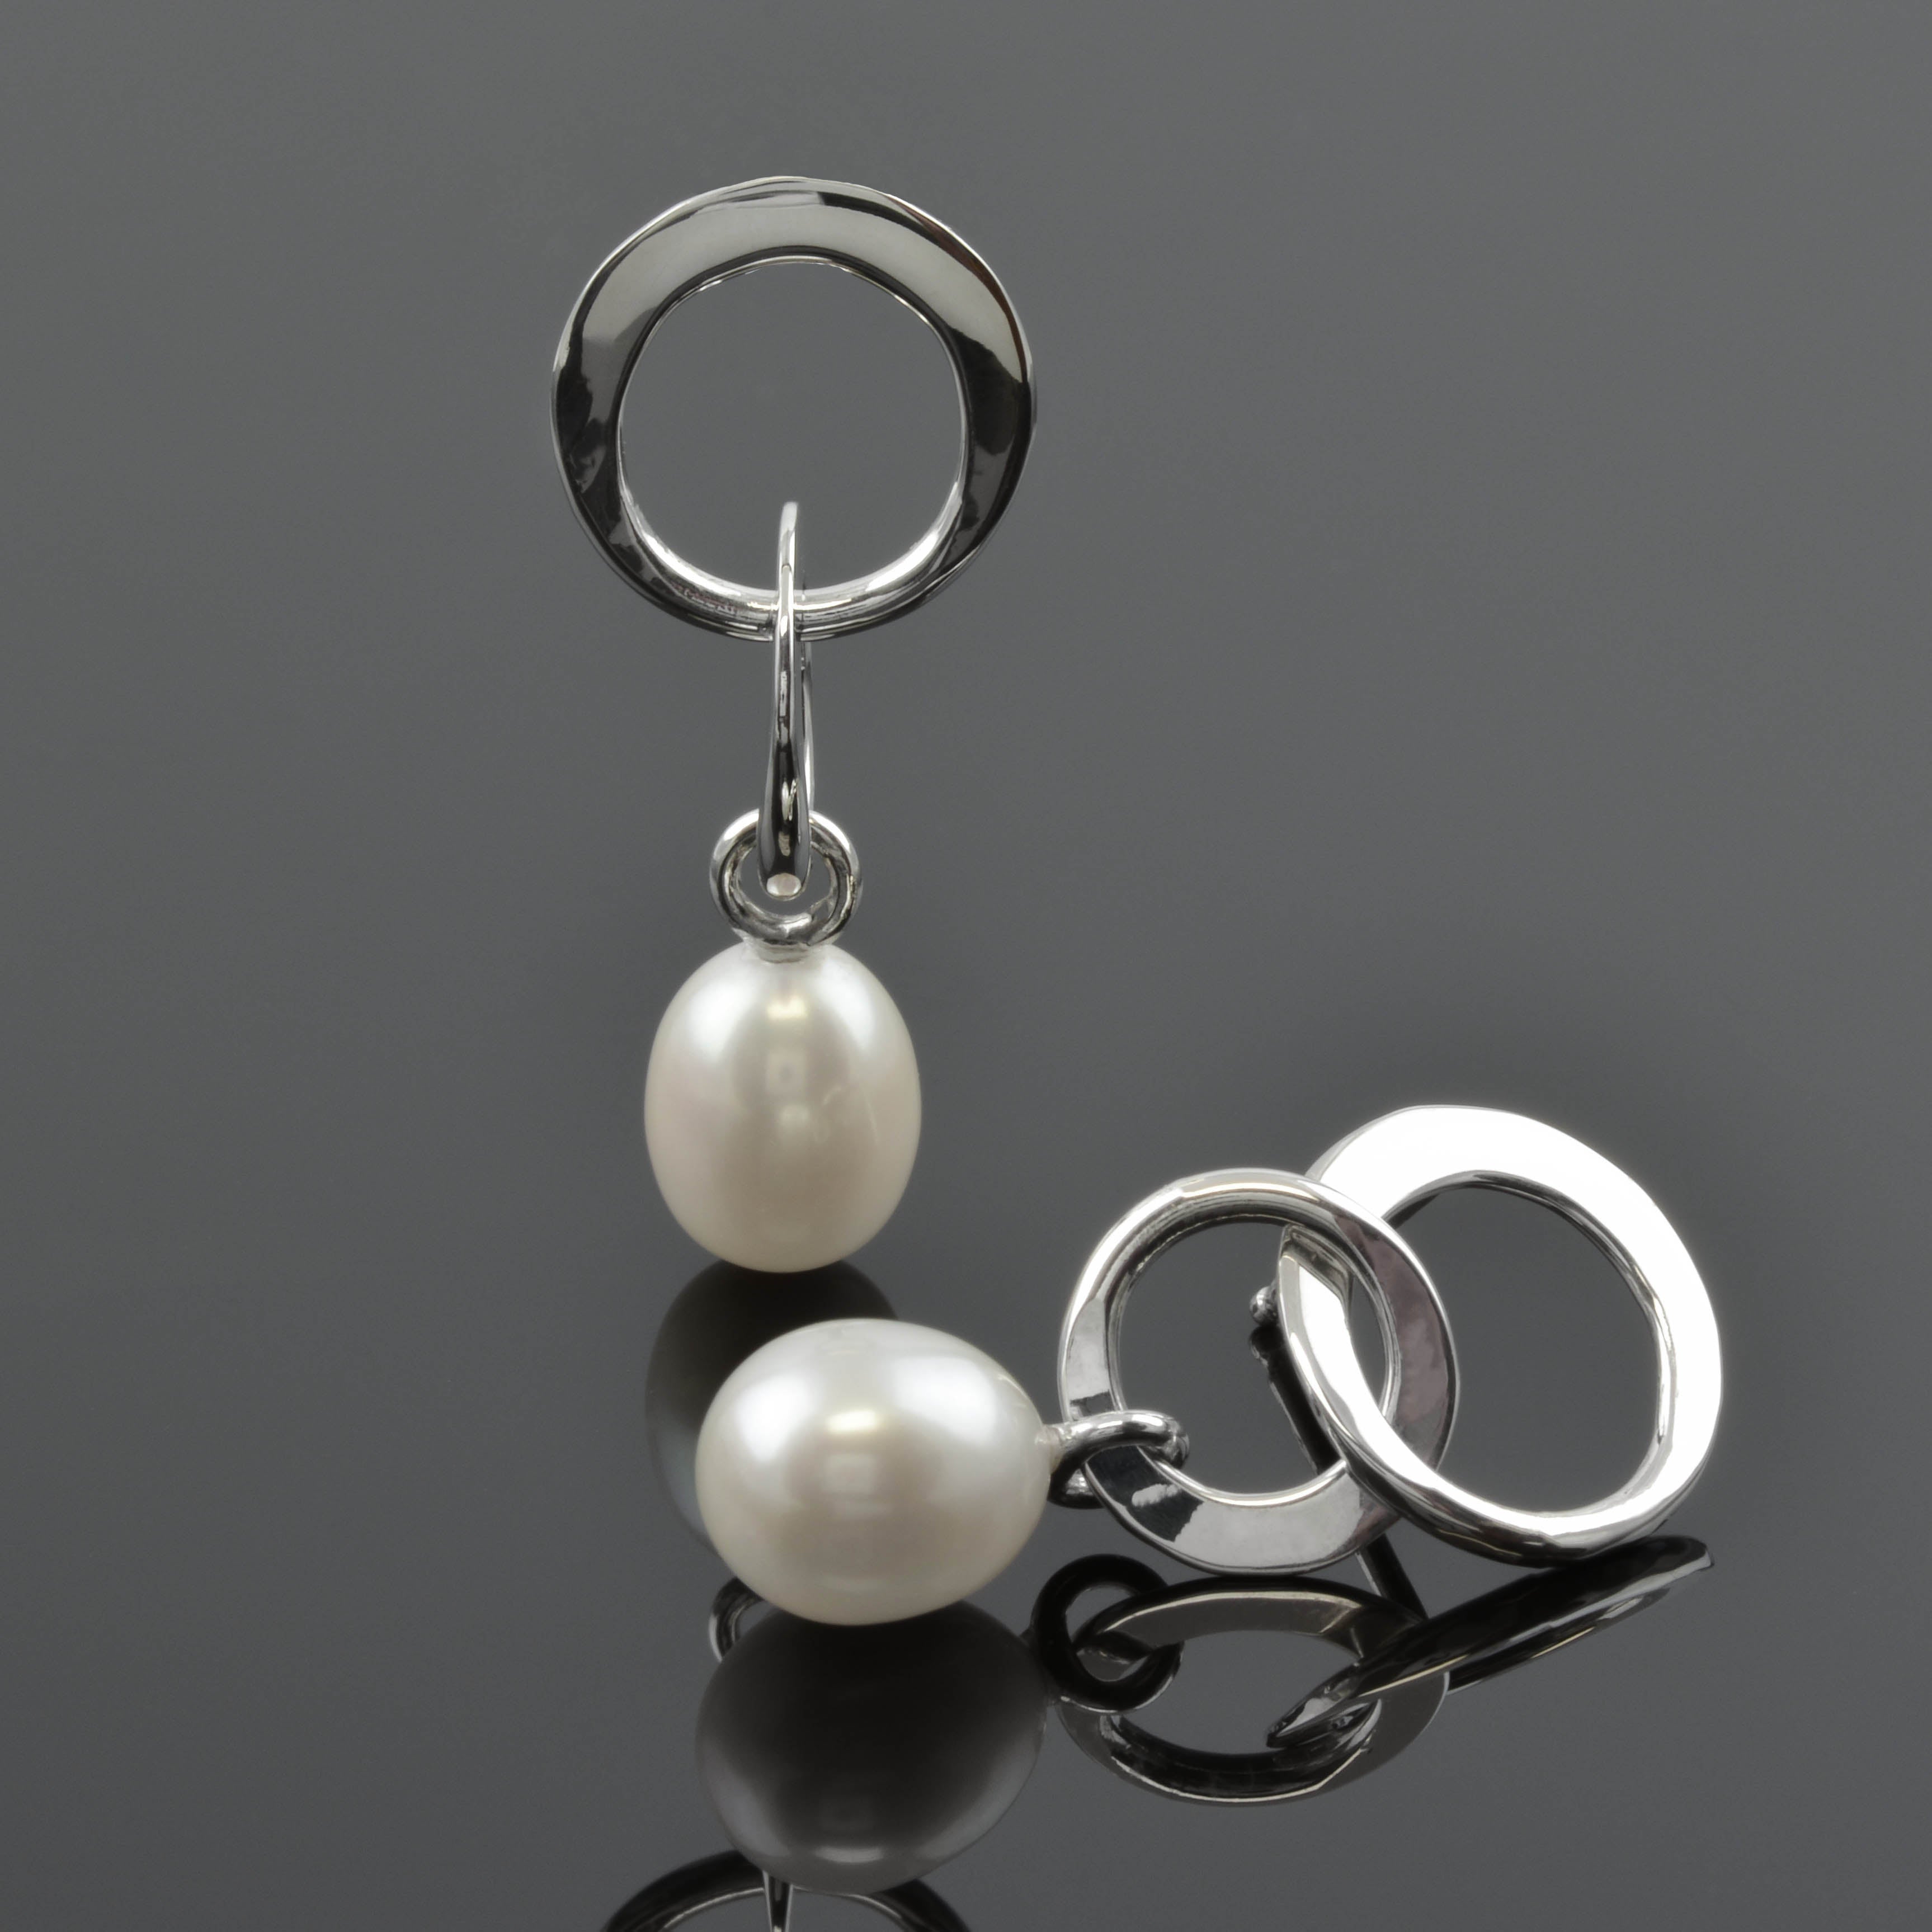 Handmade "Double Circle" Earrings With Pearls